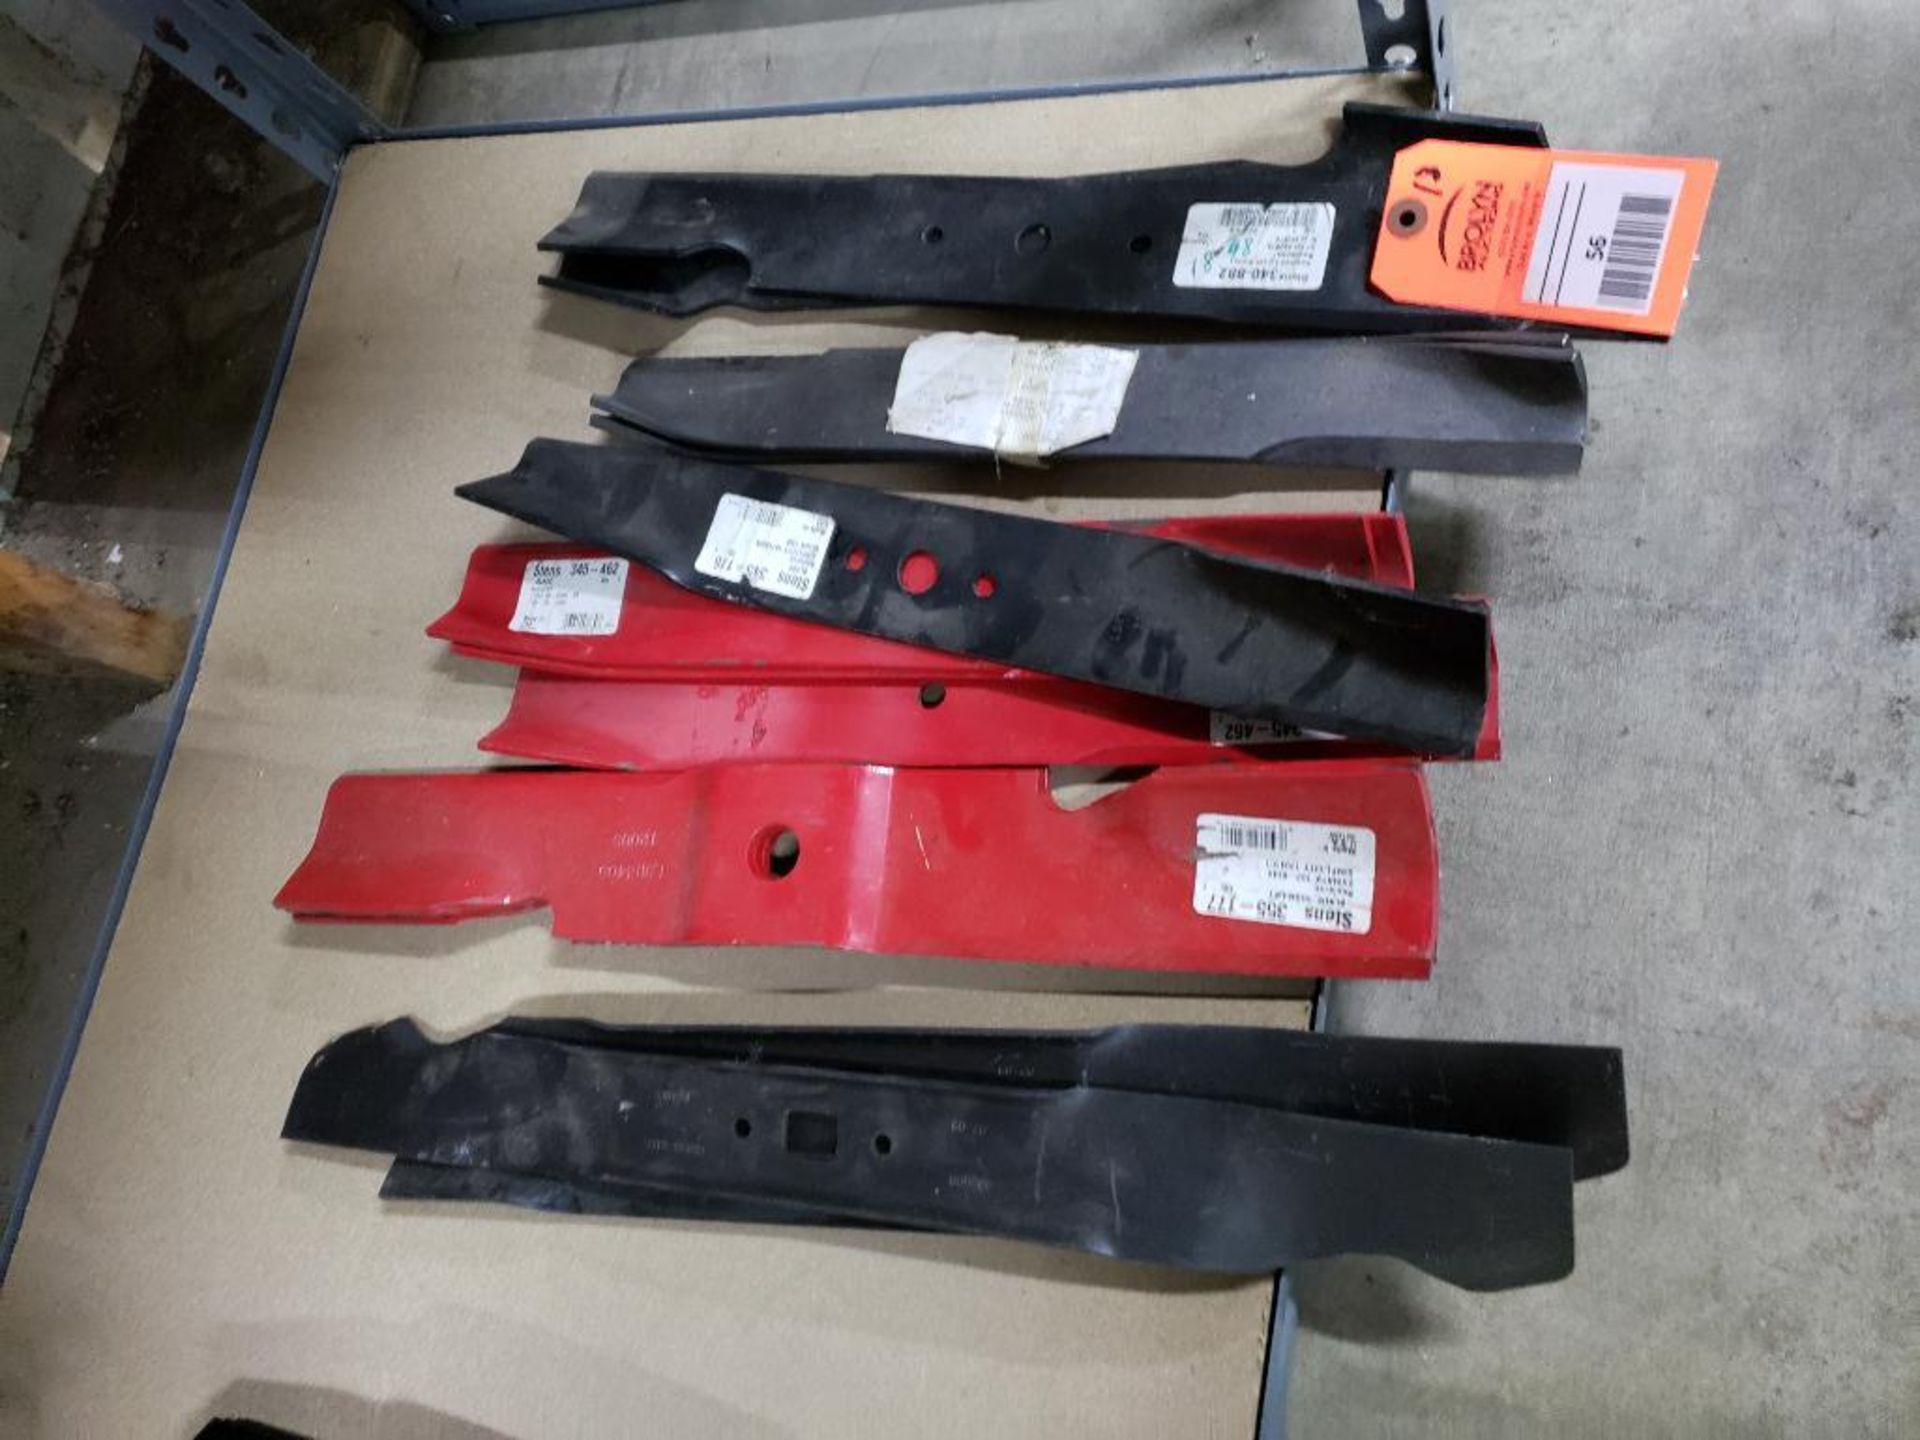 Qty 13 - Assorted mower blades. New old stock.